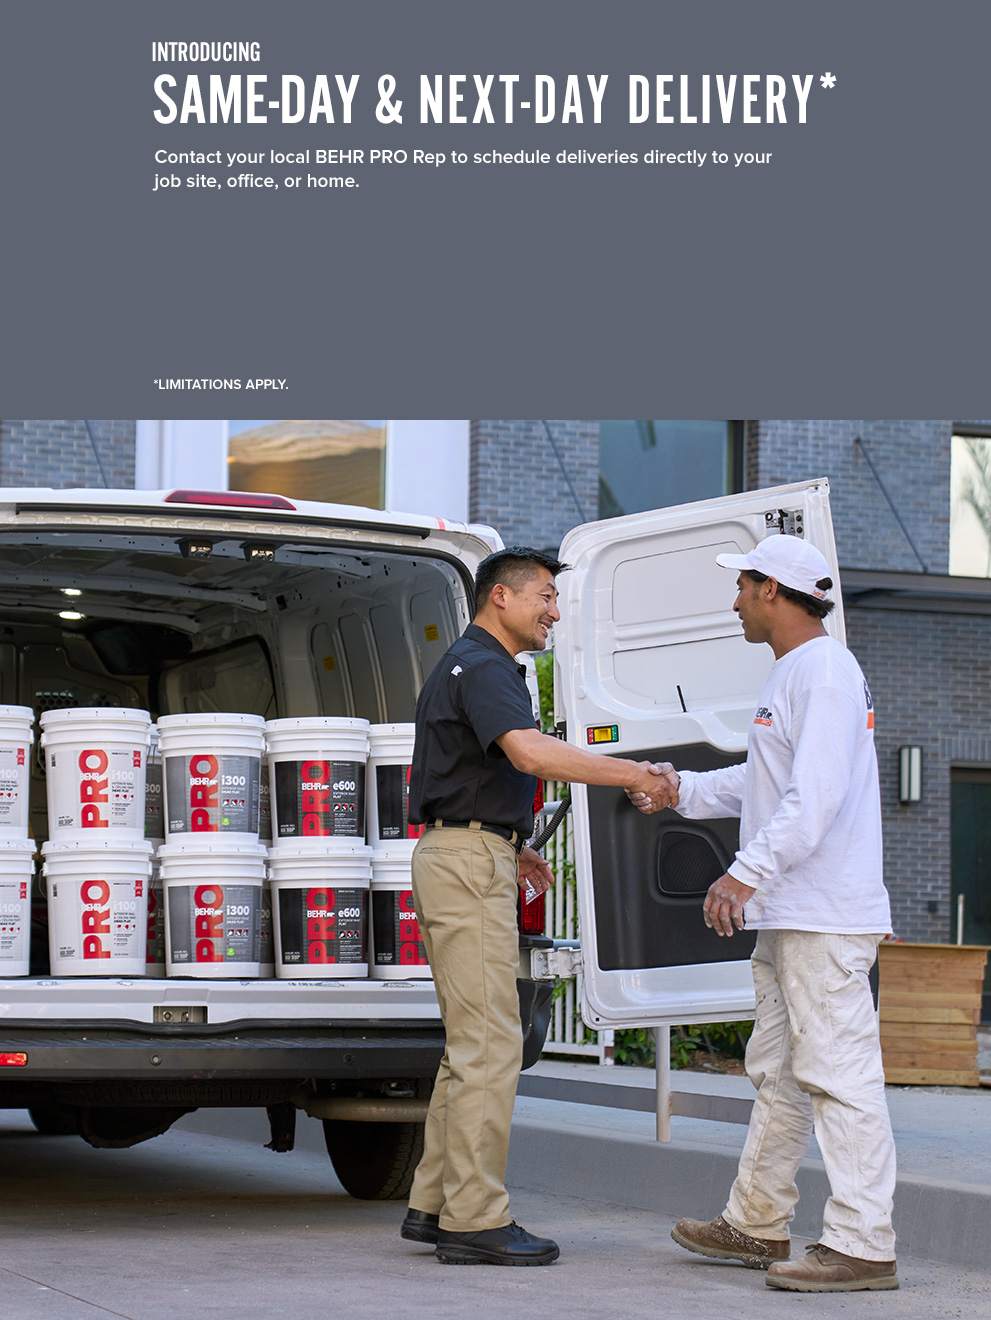 Contact your Behr Pro rep to arrange for a same-day, next day delivery